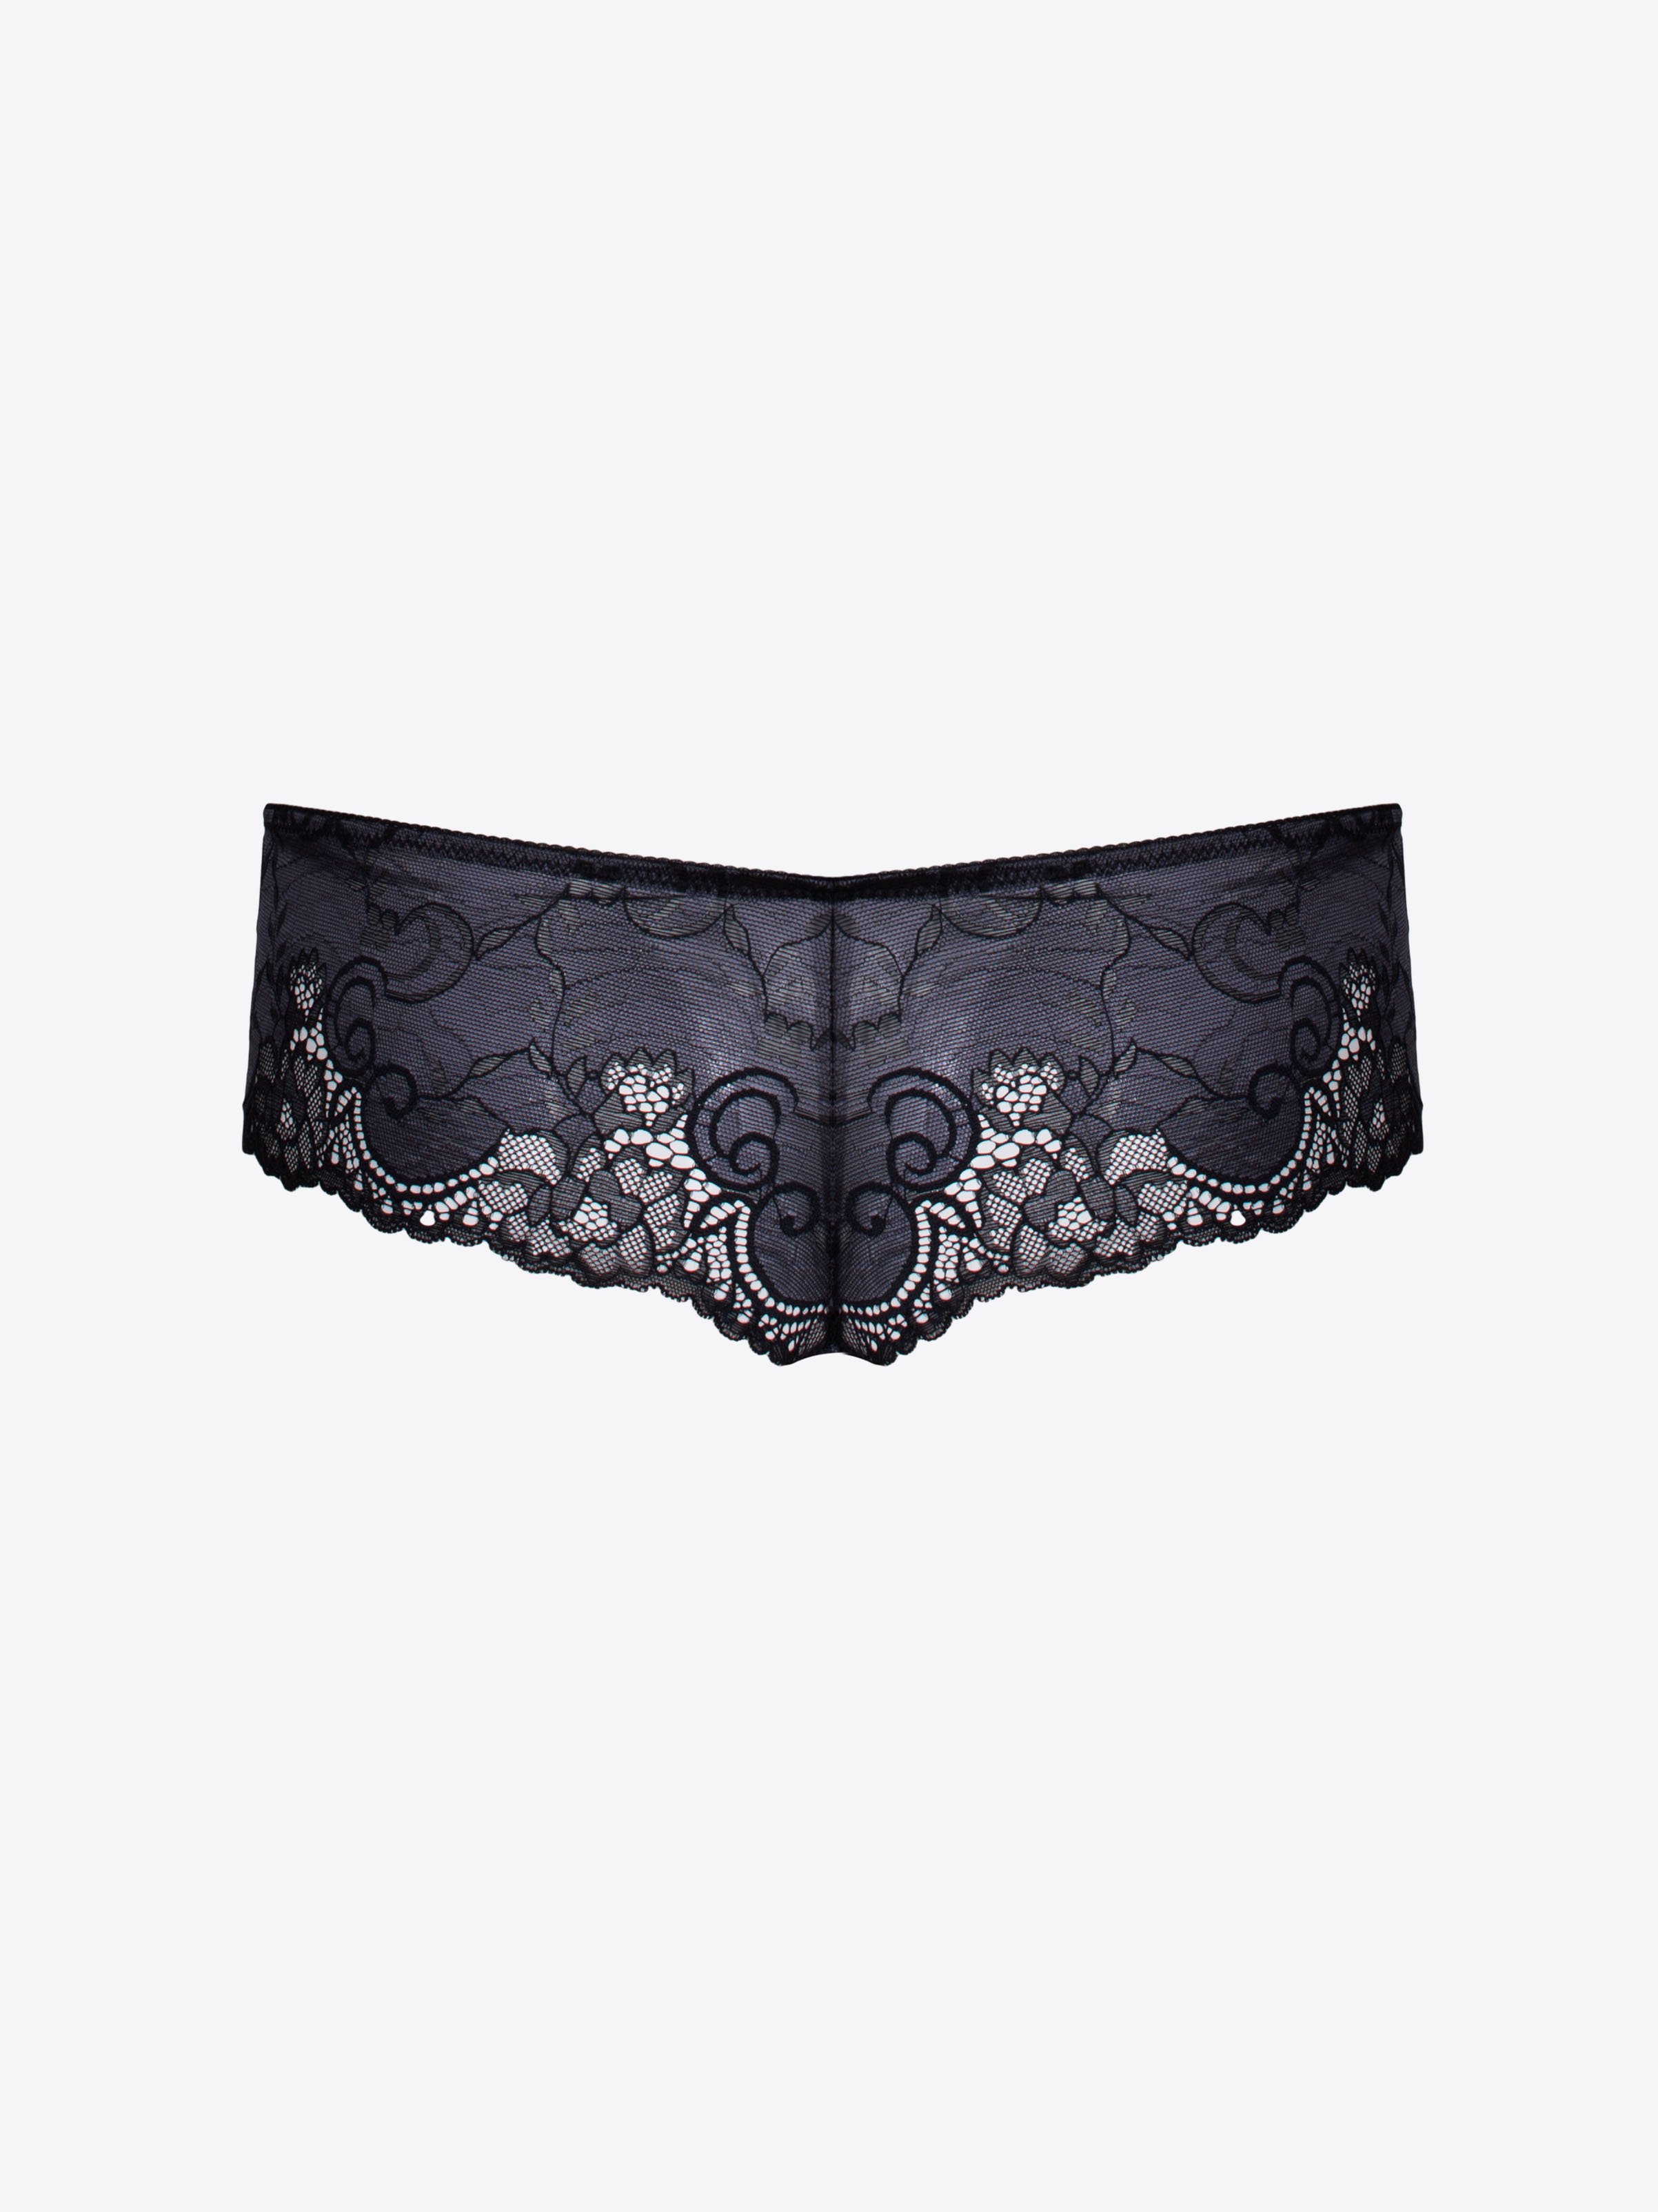 Andriana Hipster Thong - Pavement With Black - $7.80 - CHANGE Lingerie